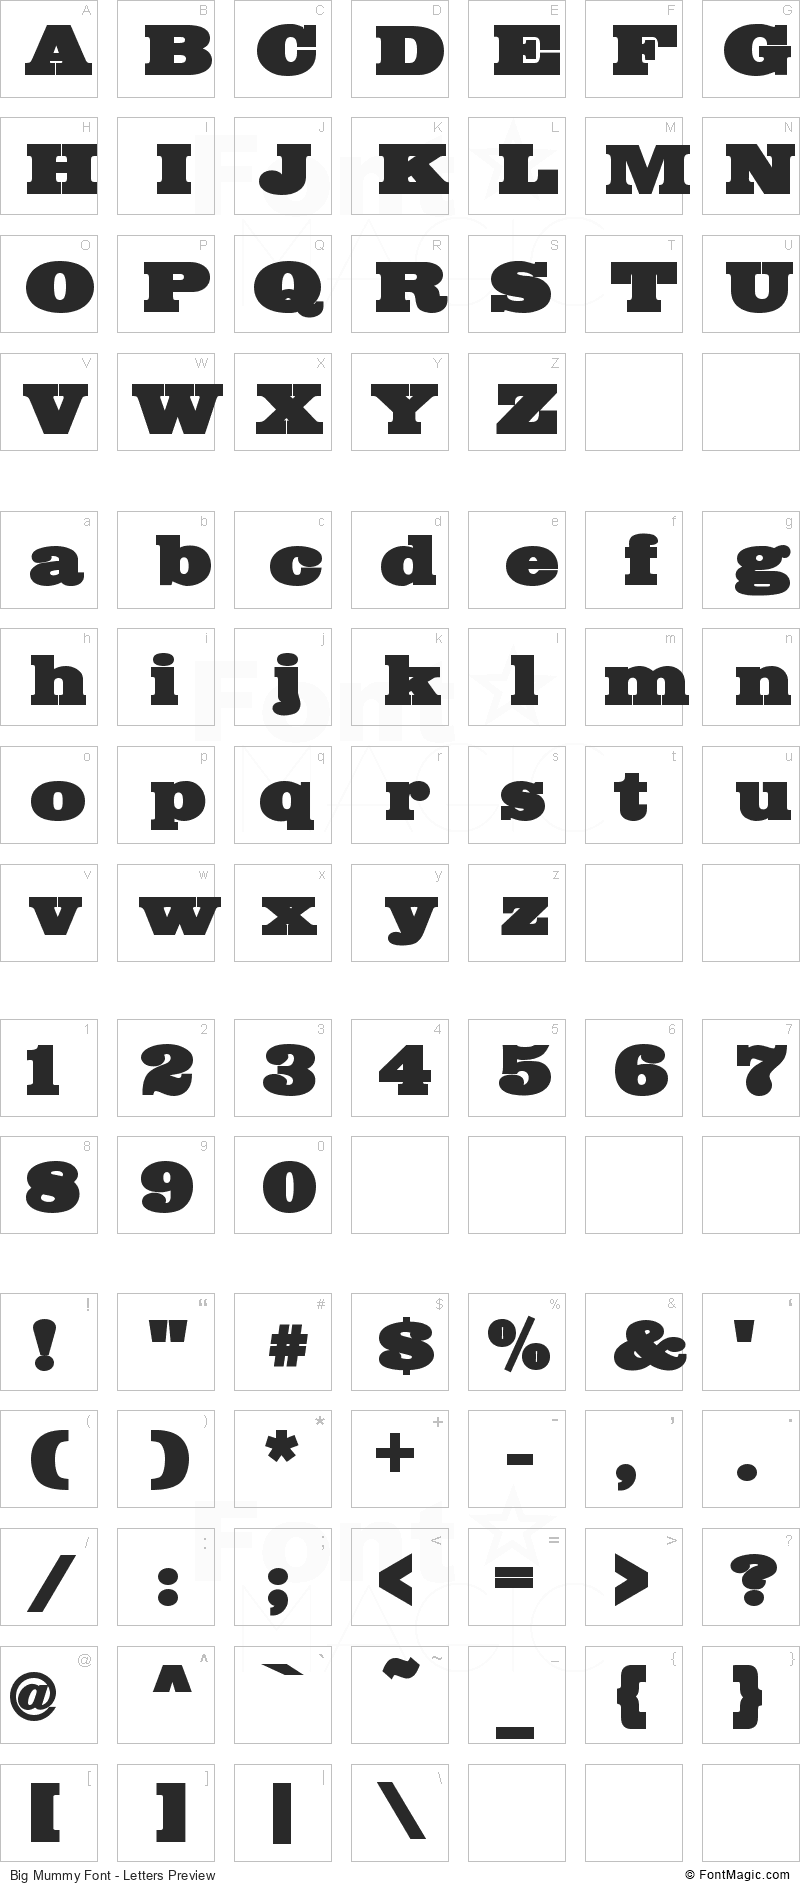 Big Mummy Font - All Latters Preview Chart